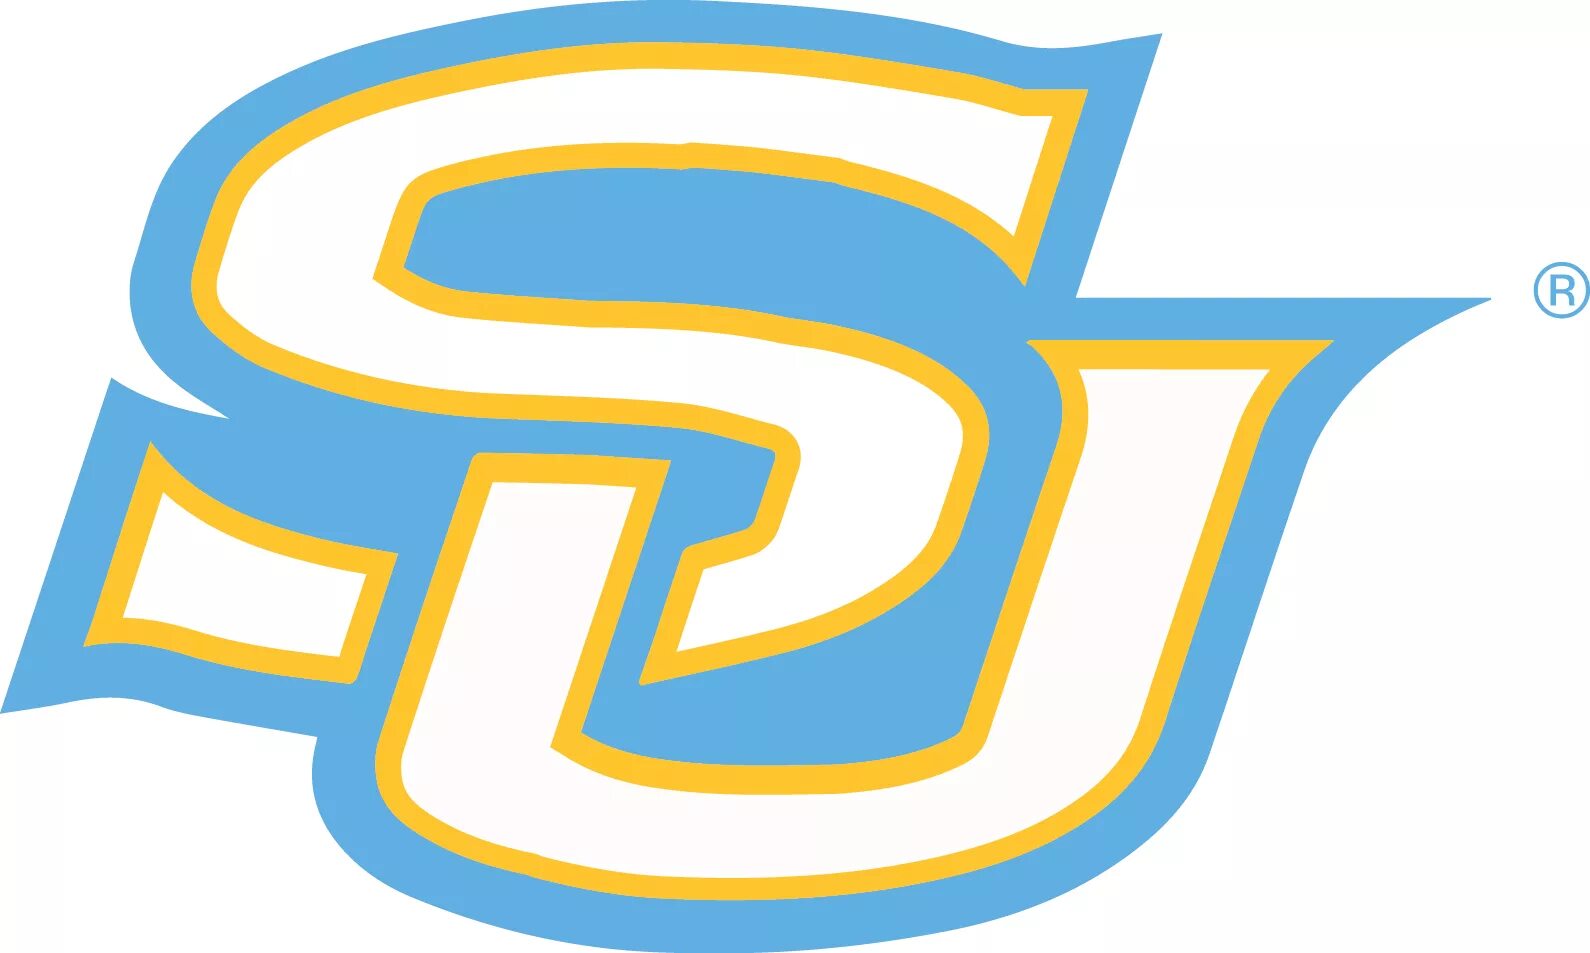 Baton rouge community College. Southern Federal State University logo vector. University of South California. Southern university